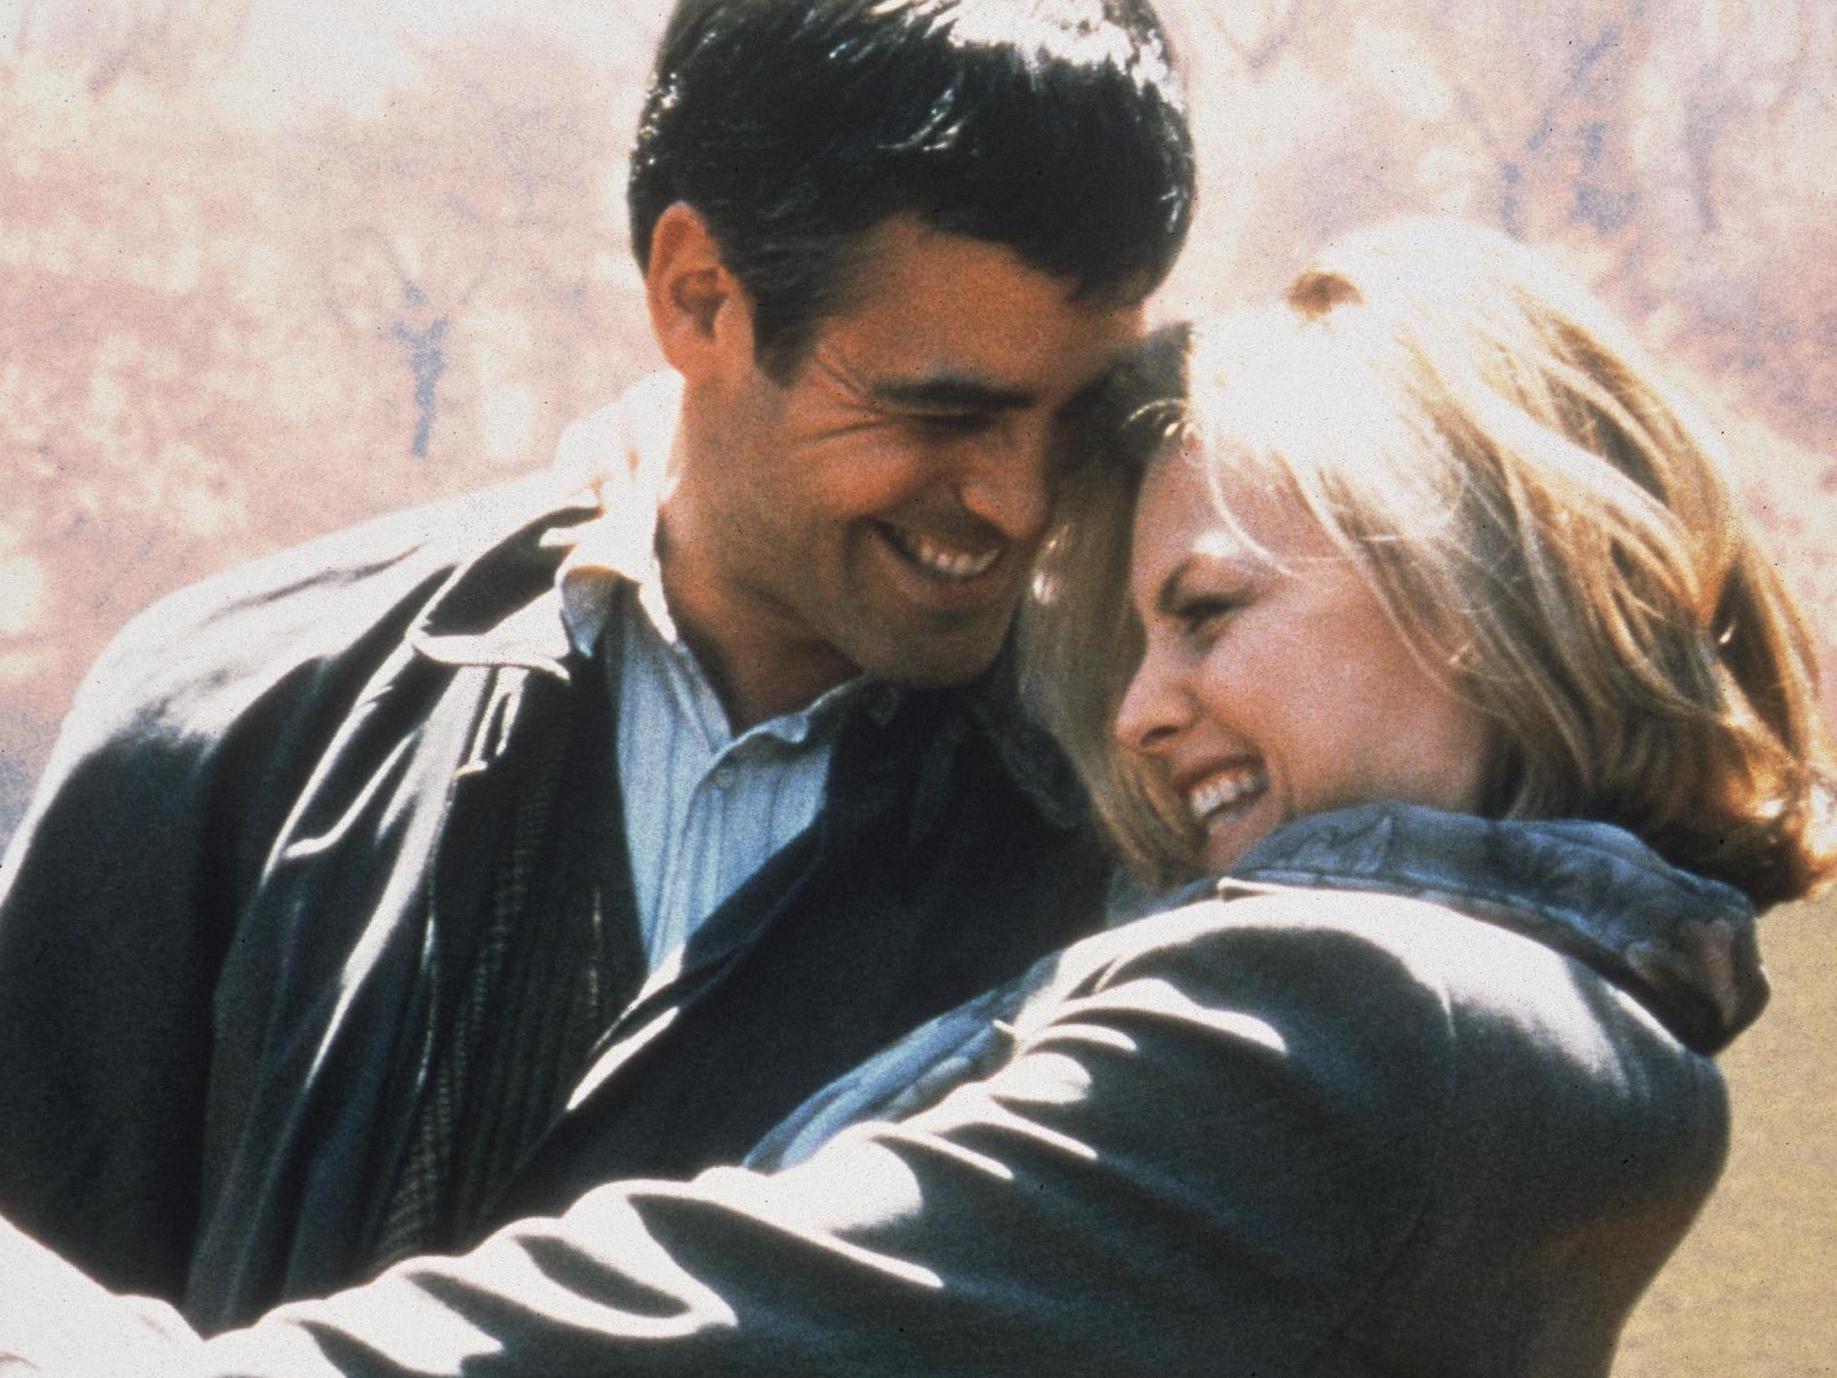 George Clooney and Michelle Pfeiffer in 'One Fine Day'